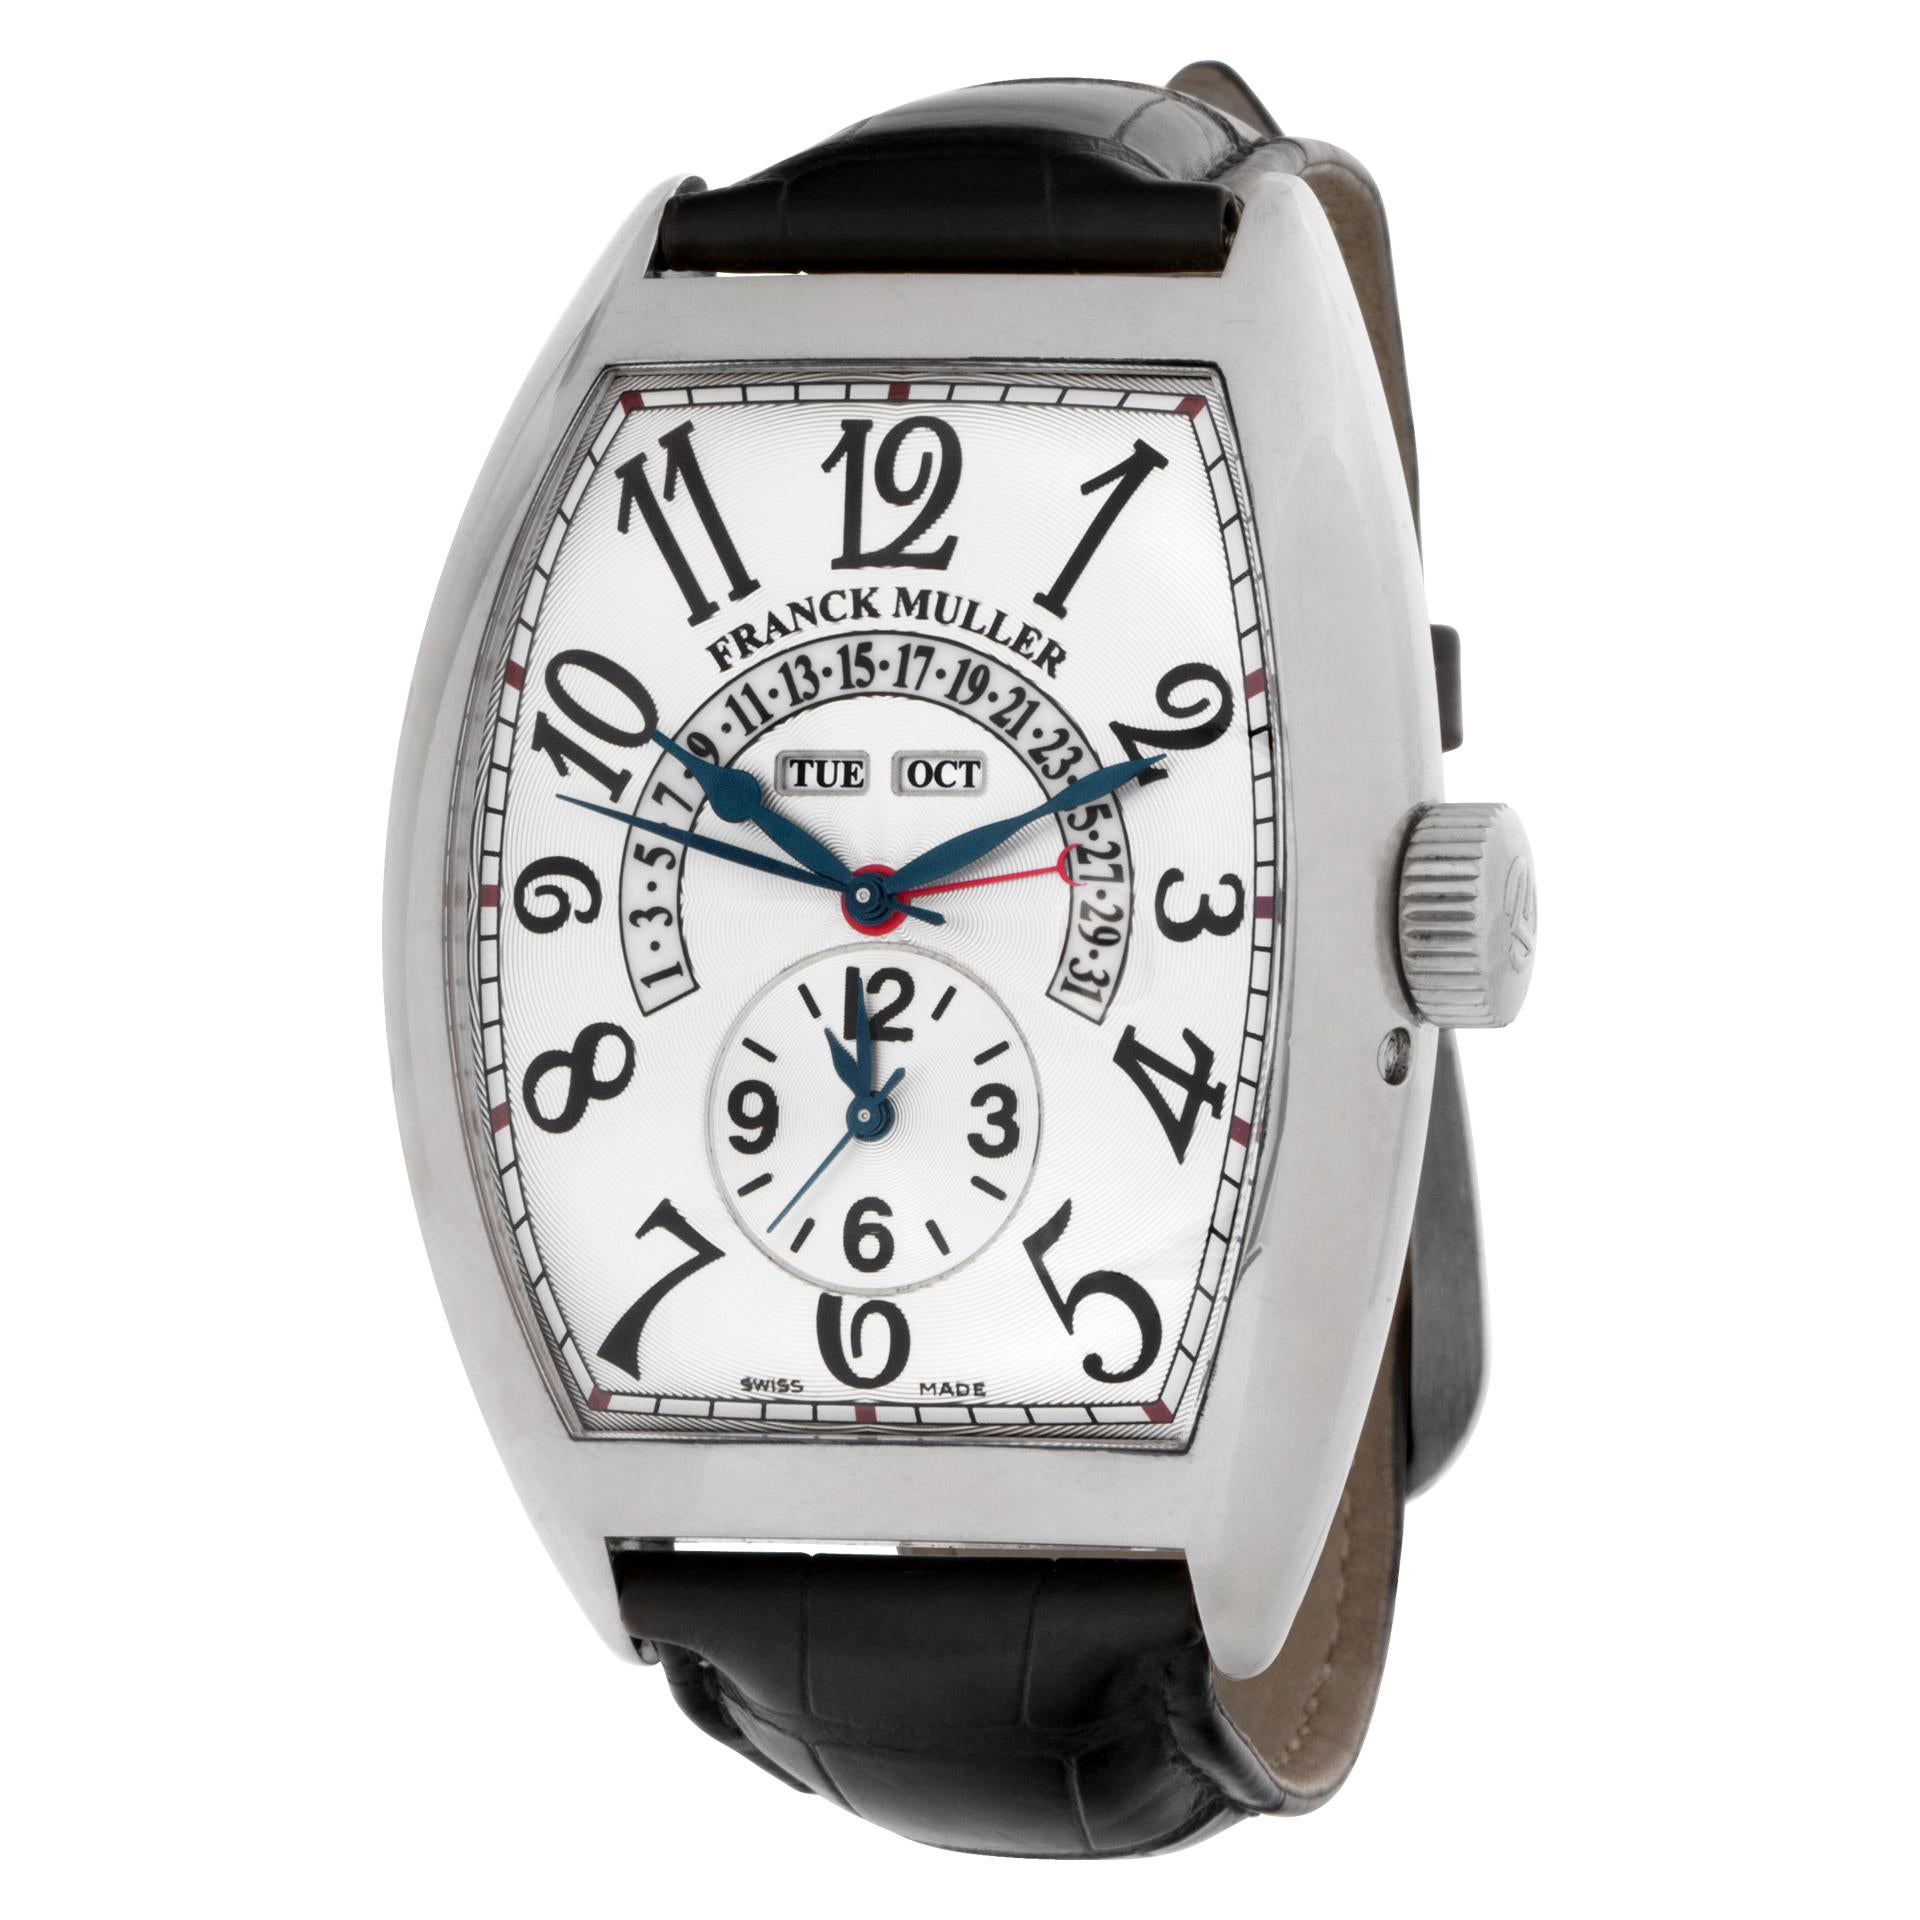 Franck Muller Master of Complications in 18k white gold on black alligator band with 18k original tang buckle. Auto w/ retrograde date, day, month, sub-seconds and dual time. 60 mm length (lug to lug) by 43 mm width case size. Ref 9880 mc mb. Circa